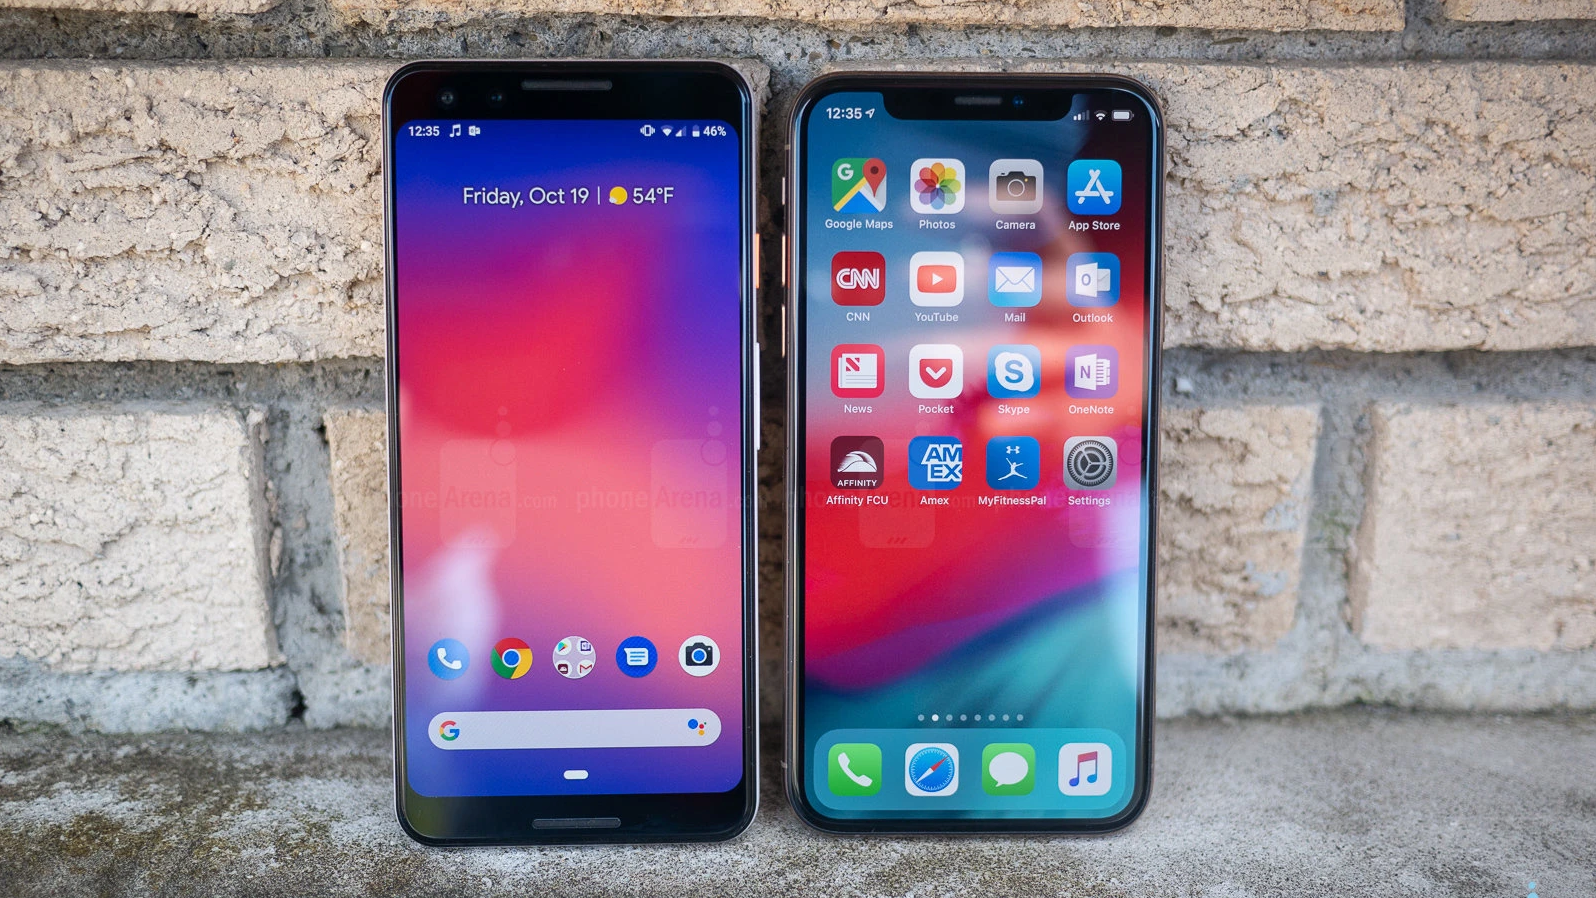 The iPhone XS made the Pixel 3 look like the iPhone 8. - Pixel 6 & 6 Pro: Should Samsung and Apple be worried?